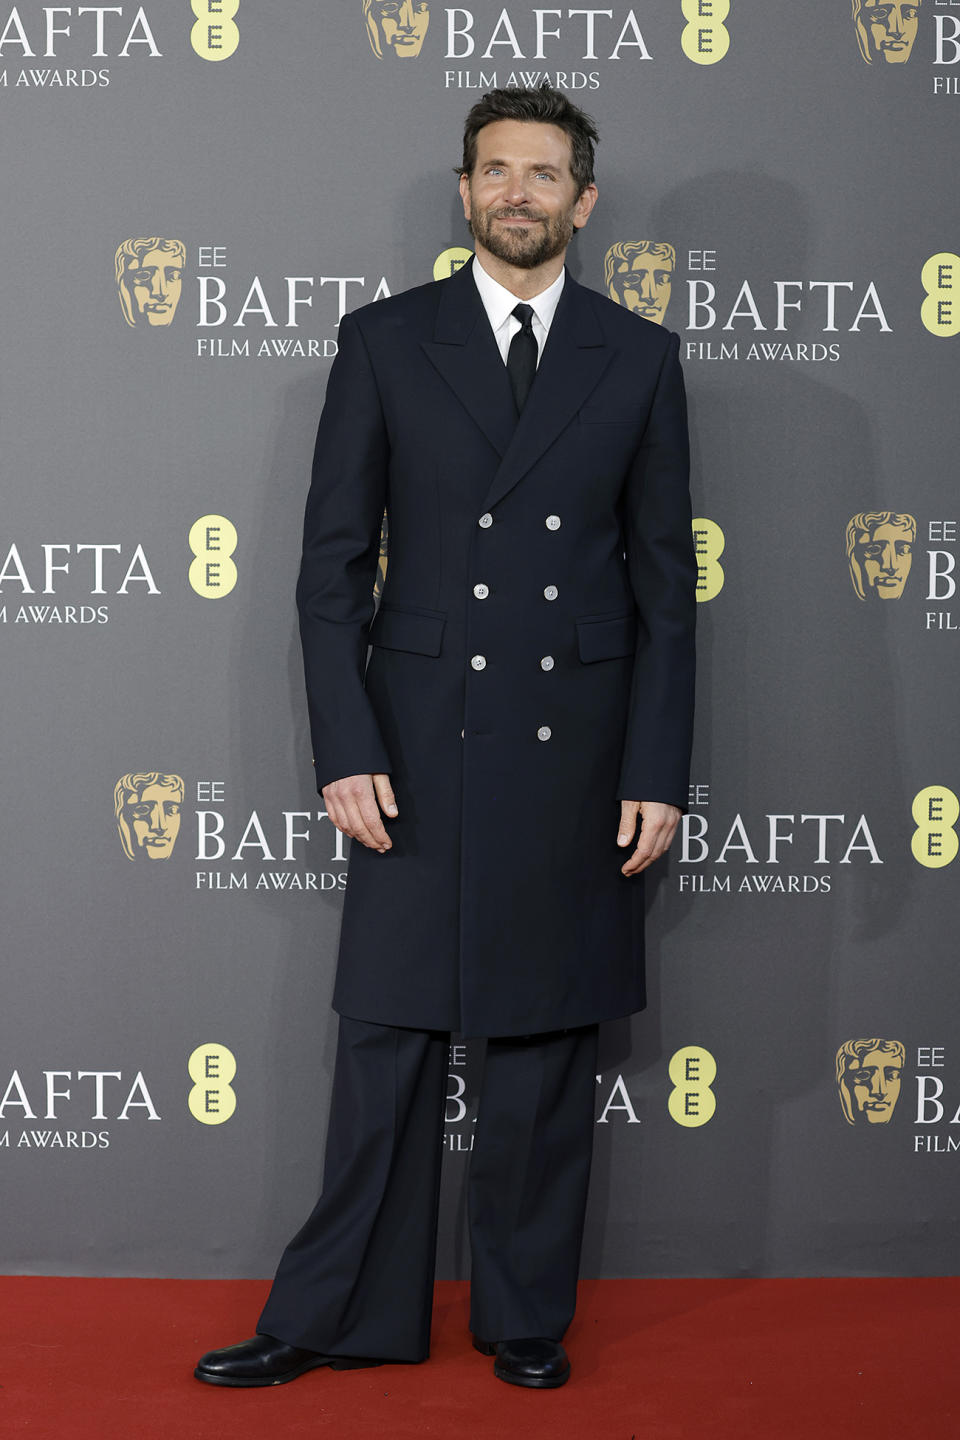 LONDON, ENGLAND - FEBRUARY 18: Bradley Cooper attends the EE BAFTA Film Awards 2024 at The Royal Festival Hall on February 18, 2024 in London, England. (Photo by John Phillips/Getty Images)